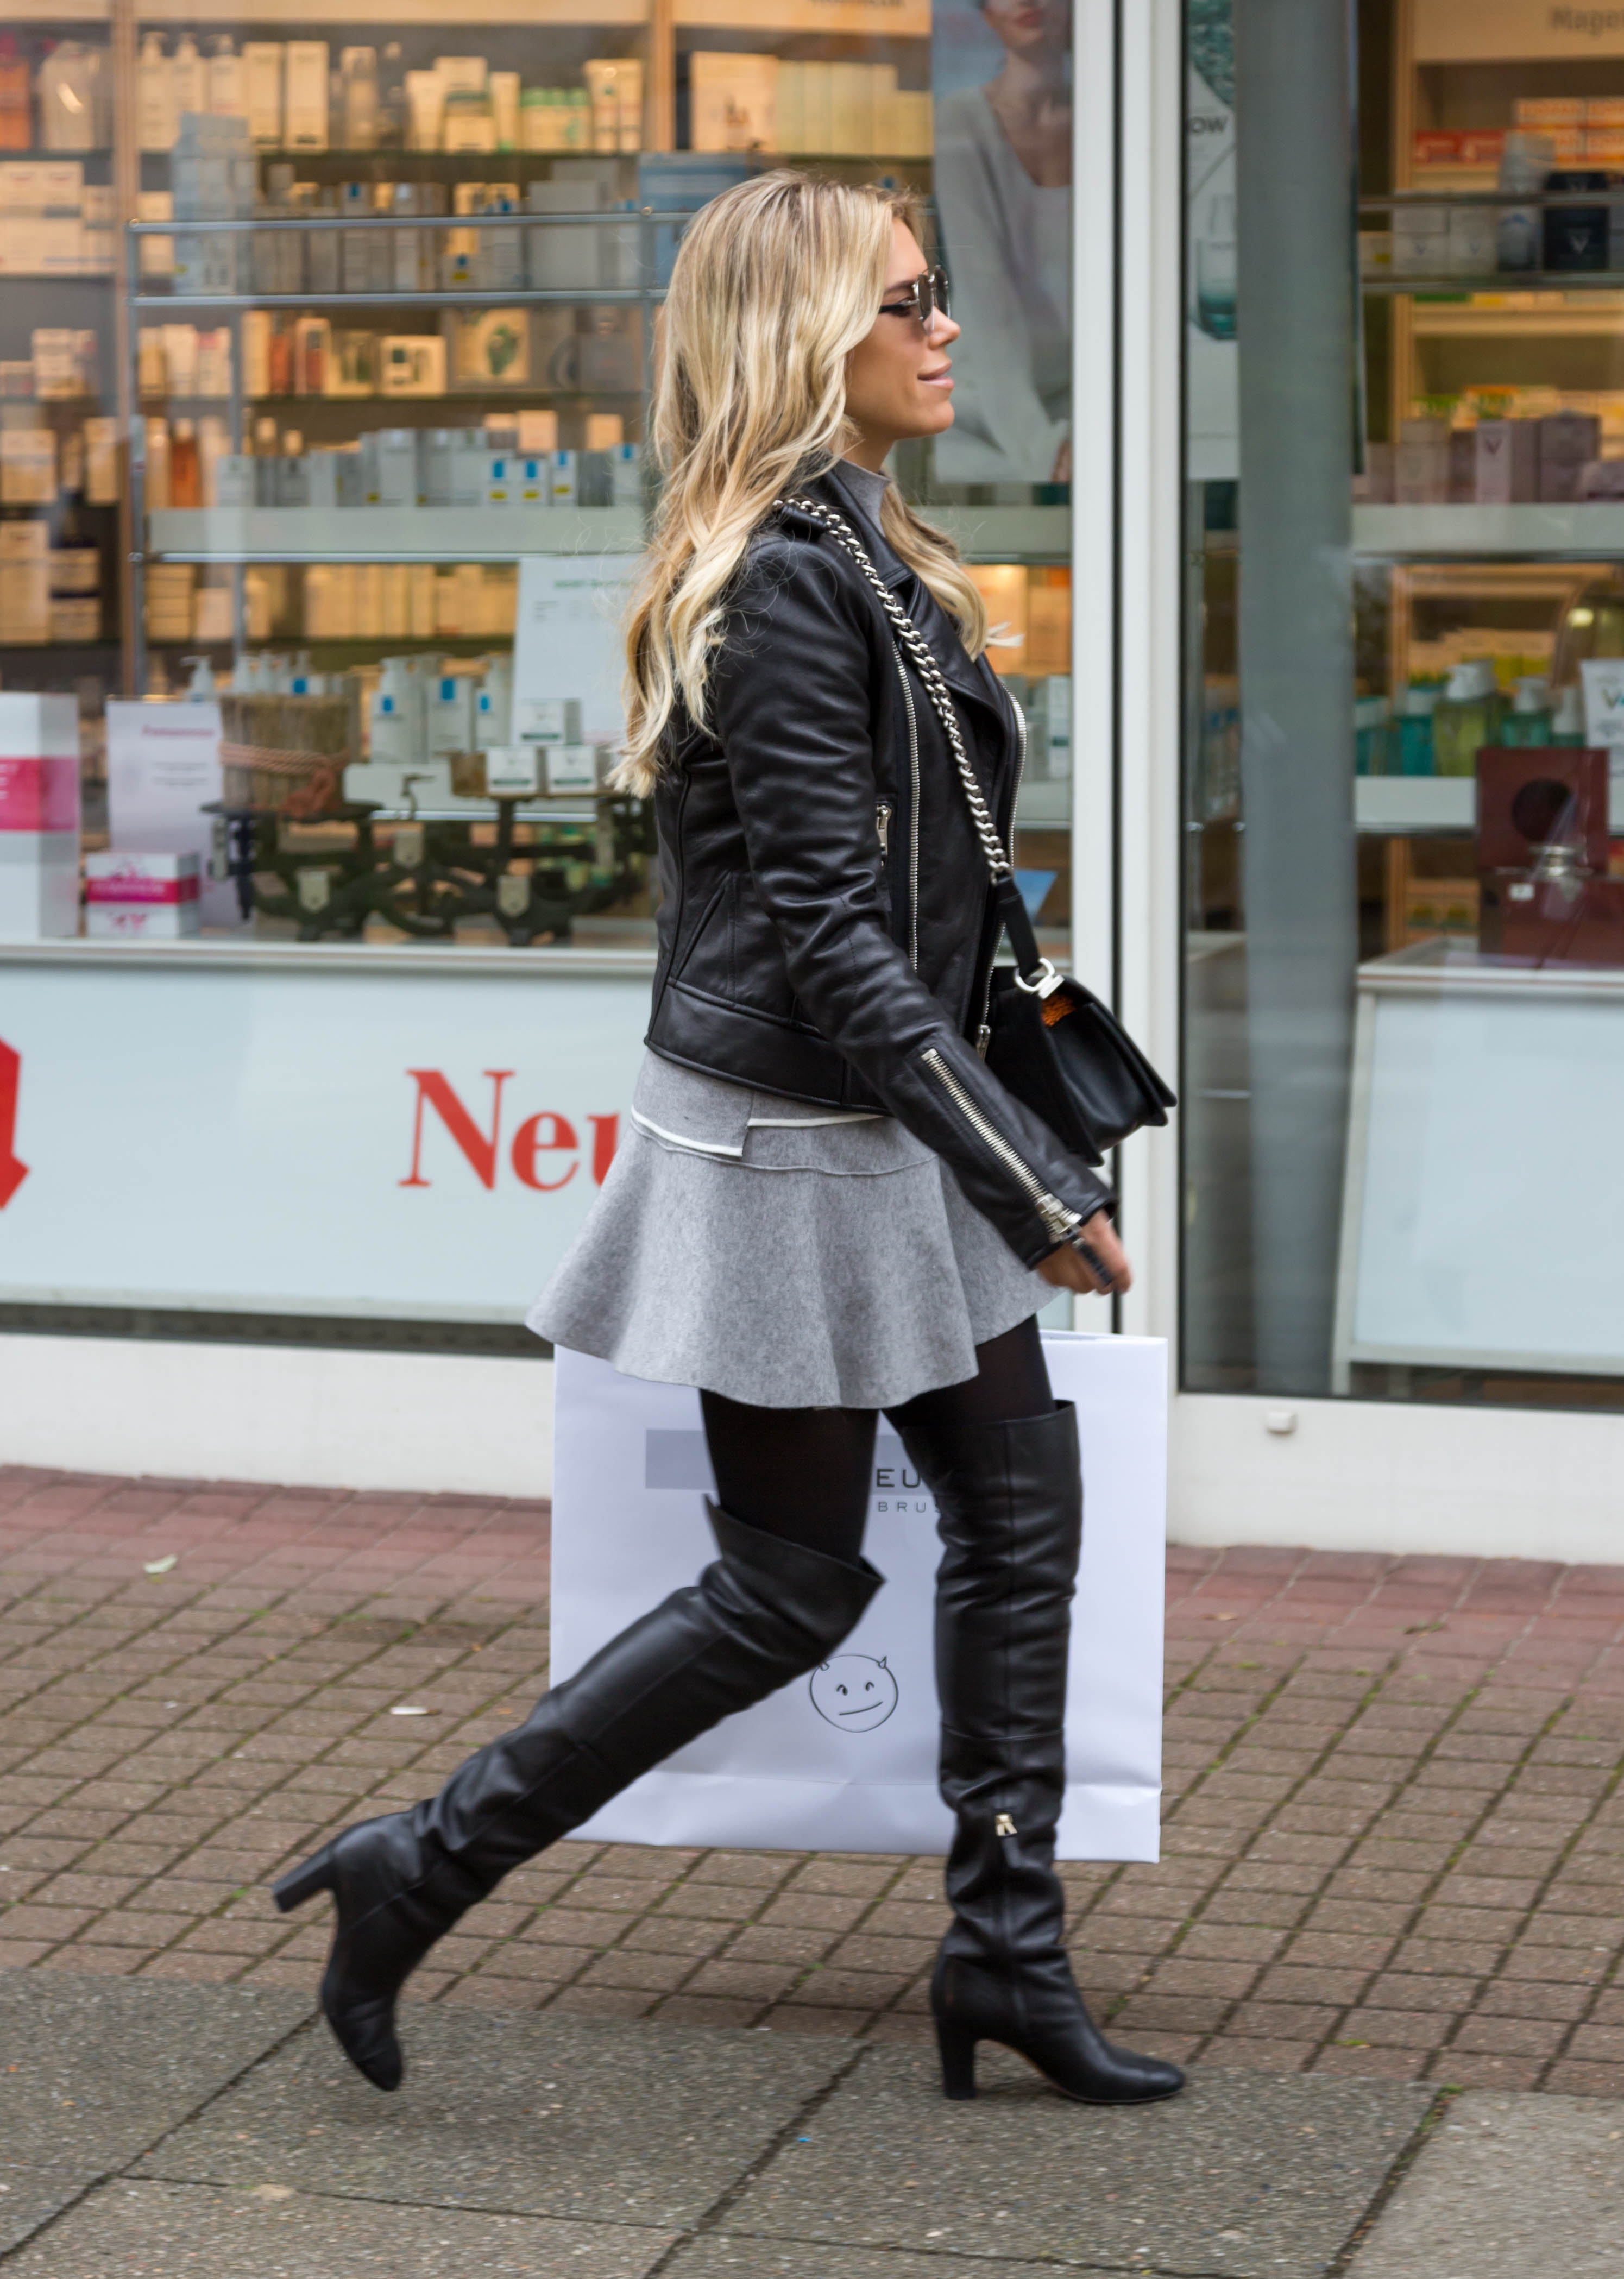 Sylvie Meis seen in Cologne